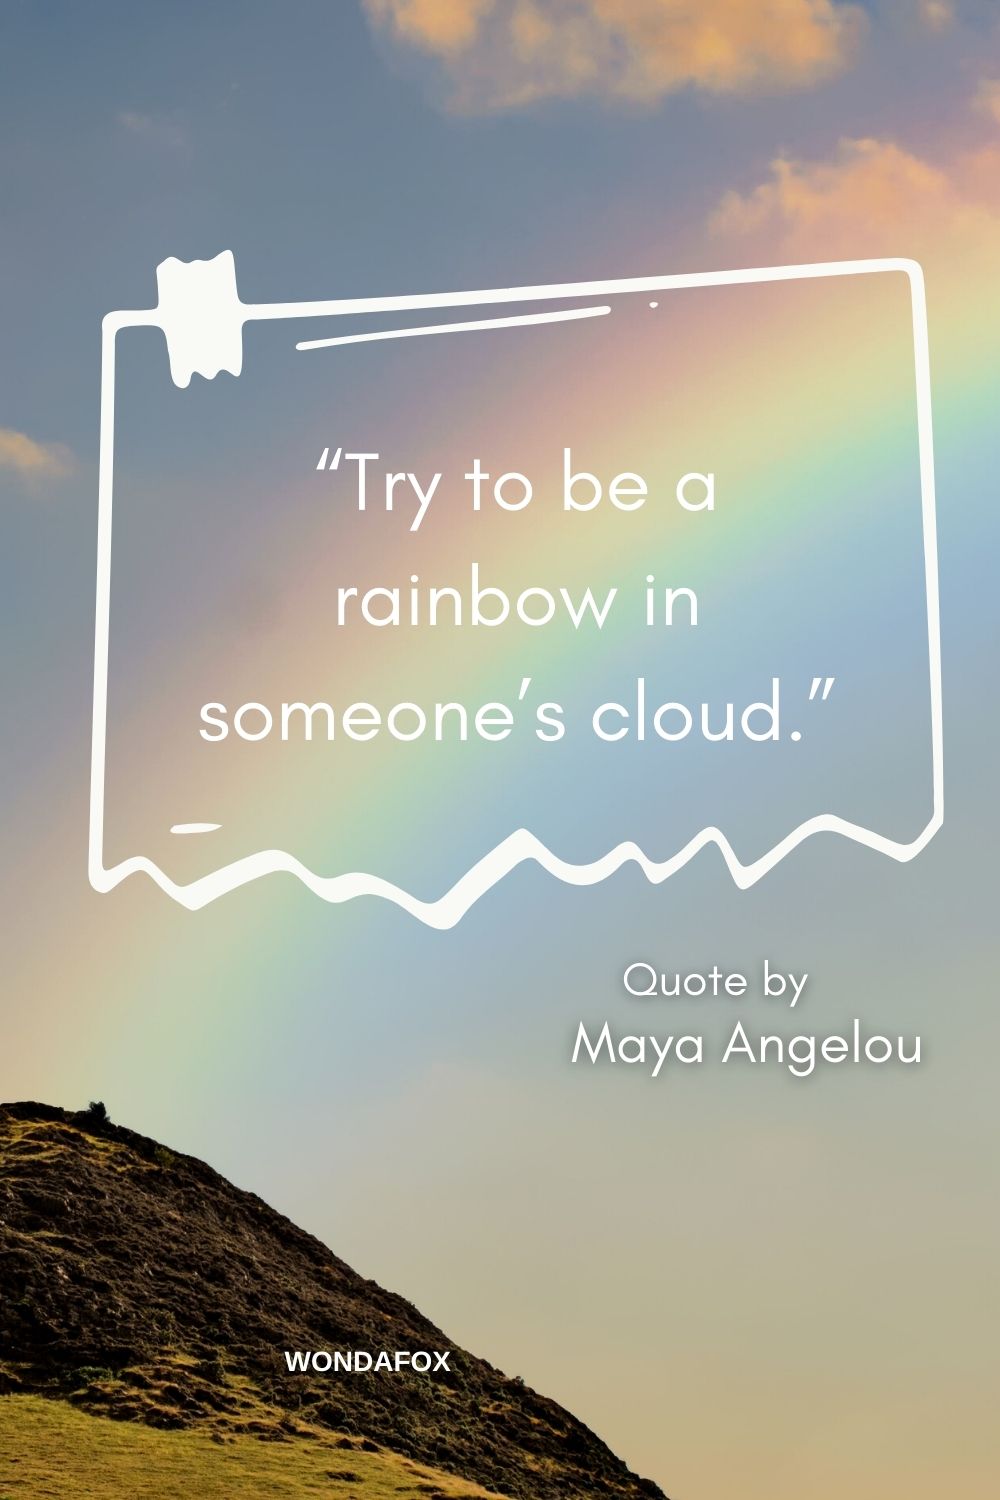 “Try to be a rainbow in someone’s cloud.”
Maya Angelou